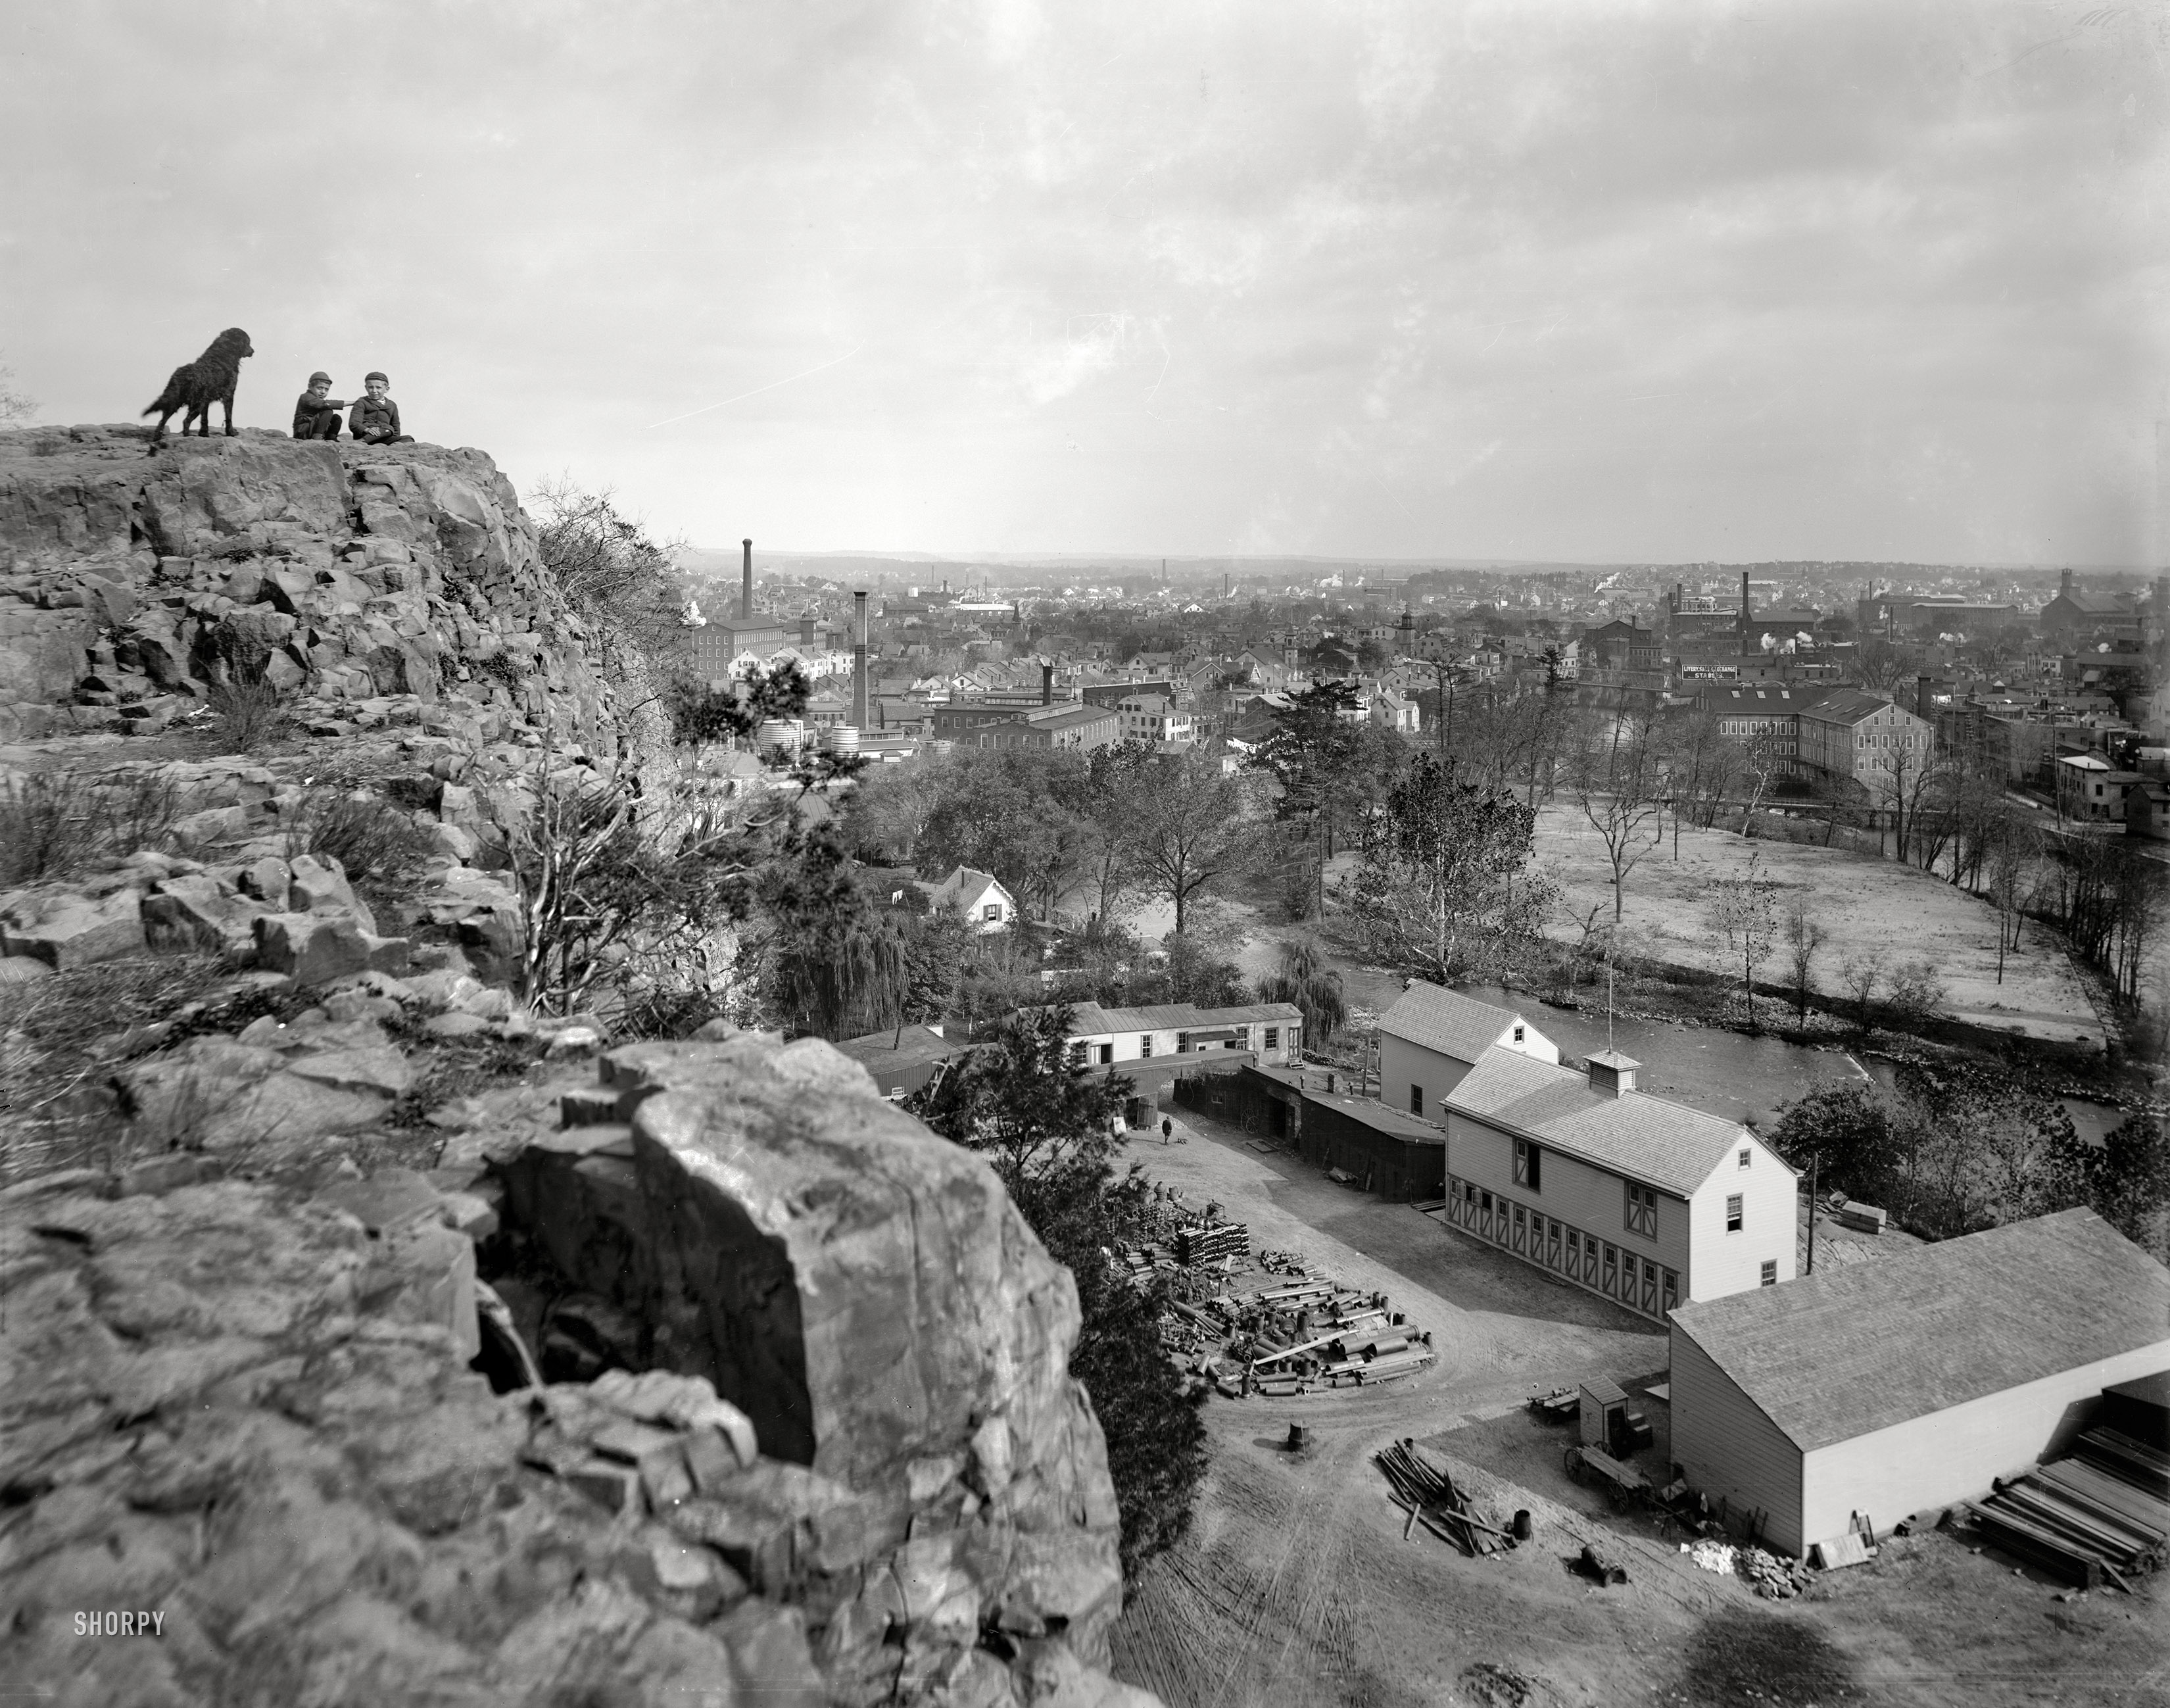 Circa 1901. "Paterson, New Jersey, from Reservoir Park." Garden spot of the Garden State. 8x10 glass negative, Detroit Publishing Co. View full size.